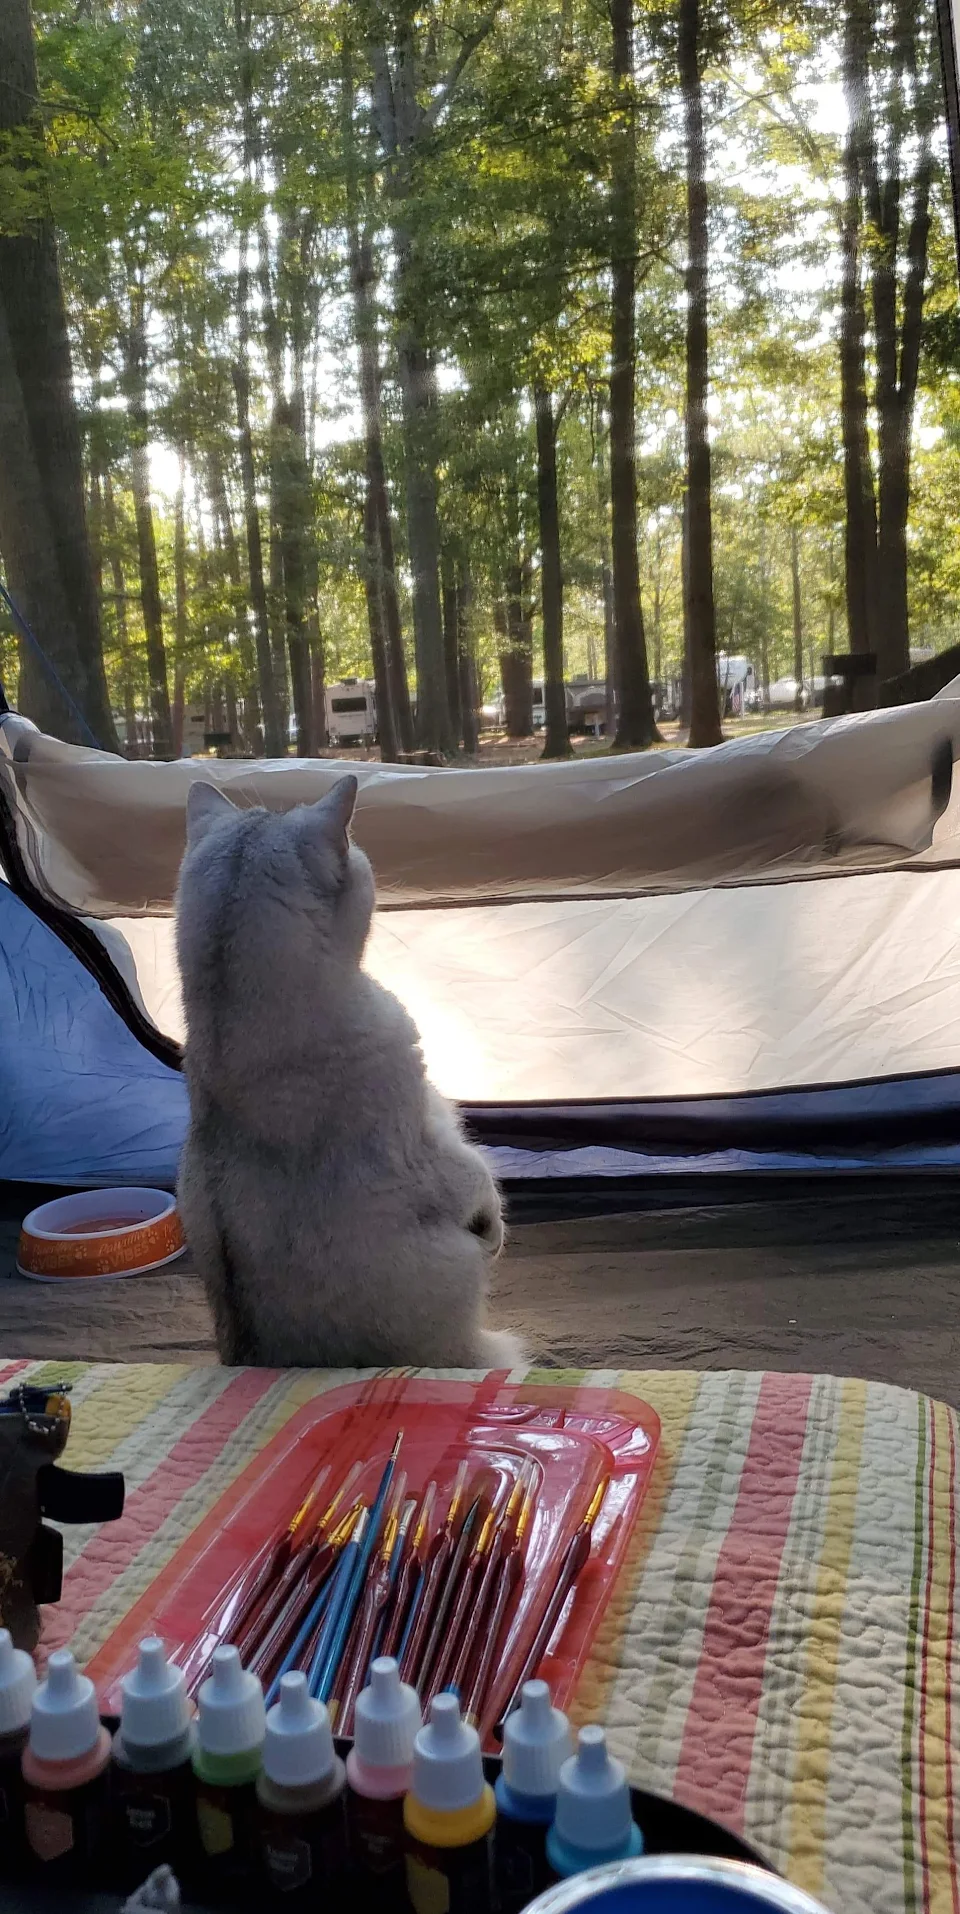 Luna is extremely entertained while camping